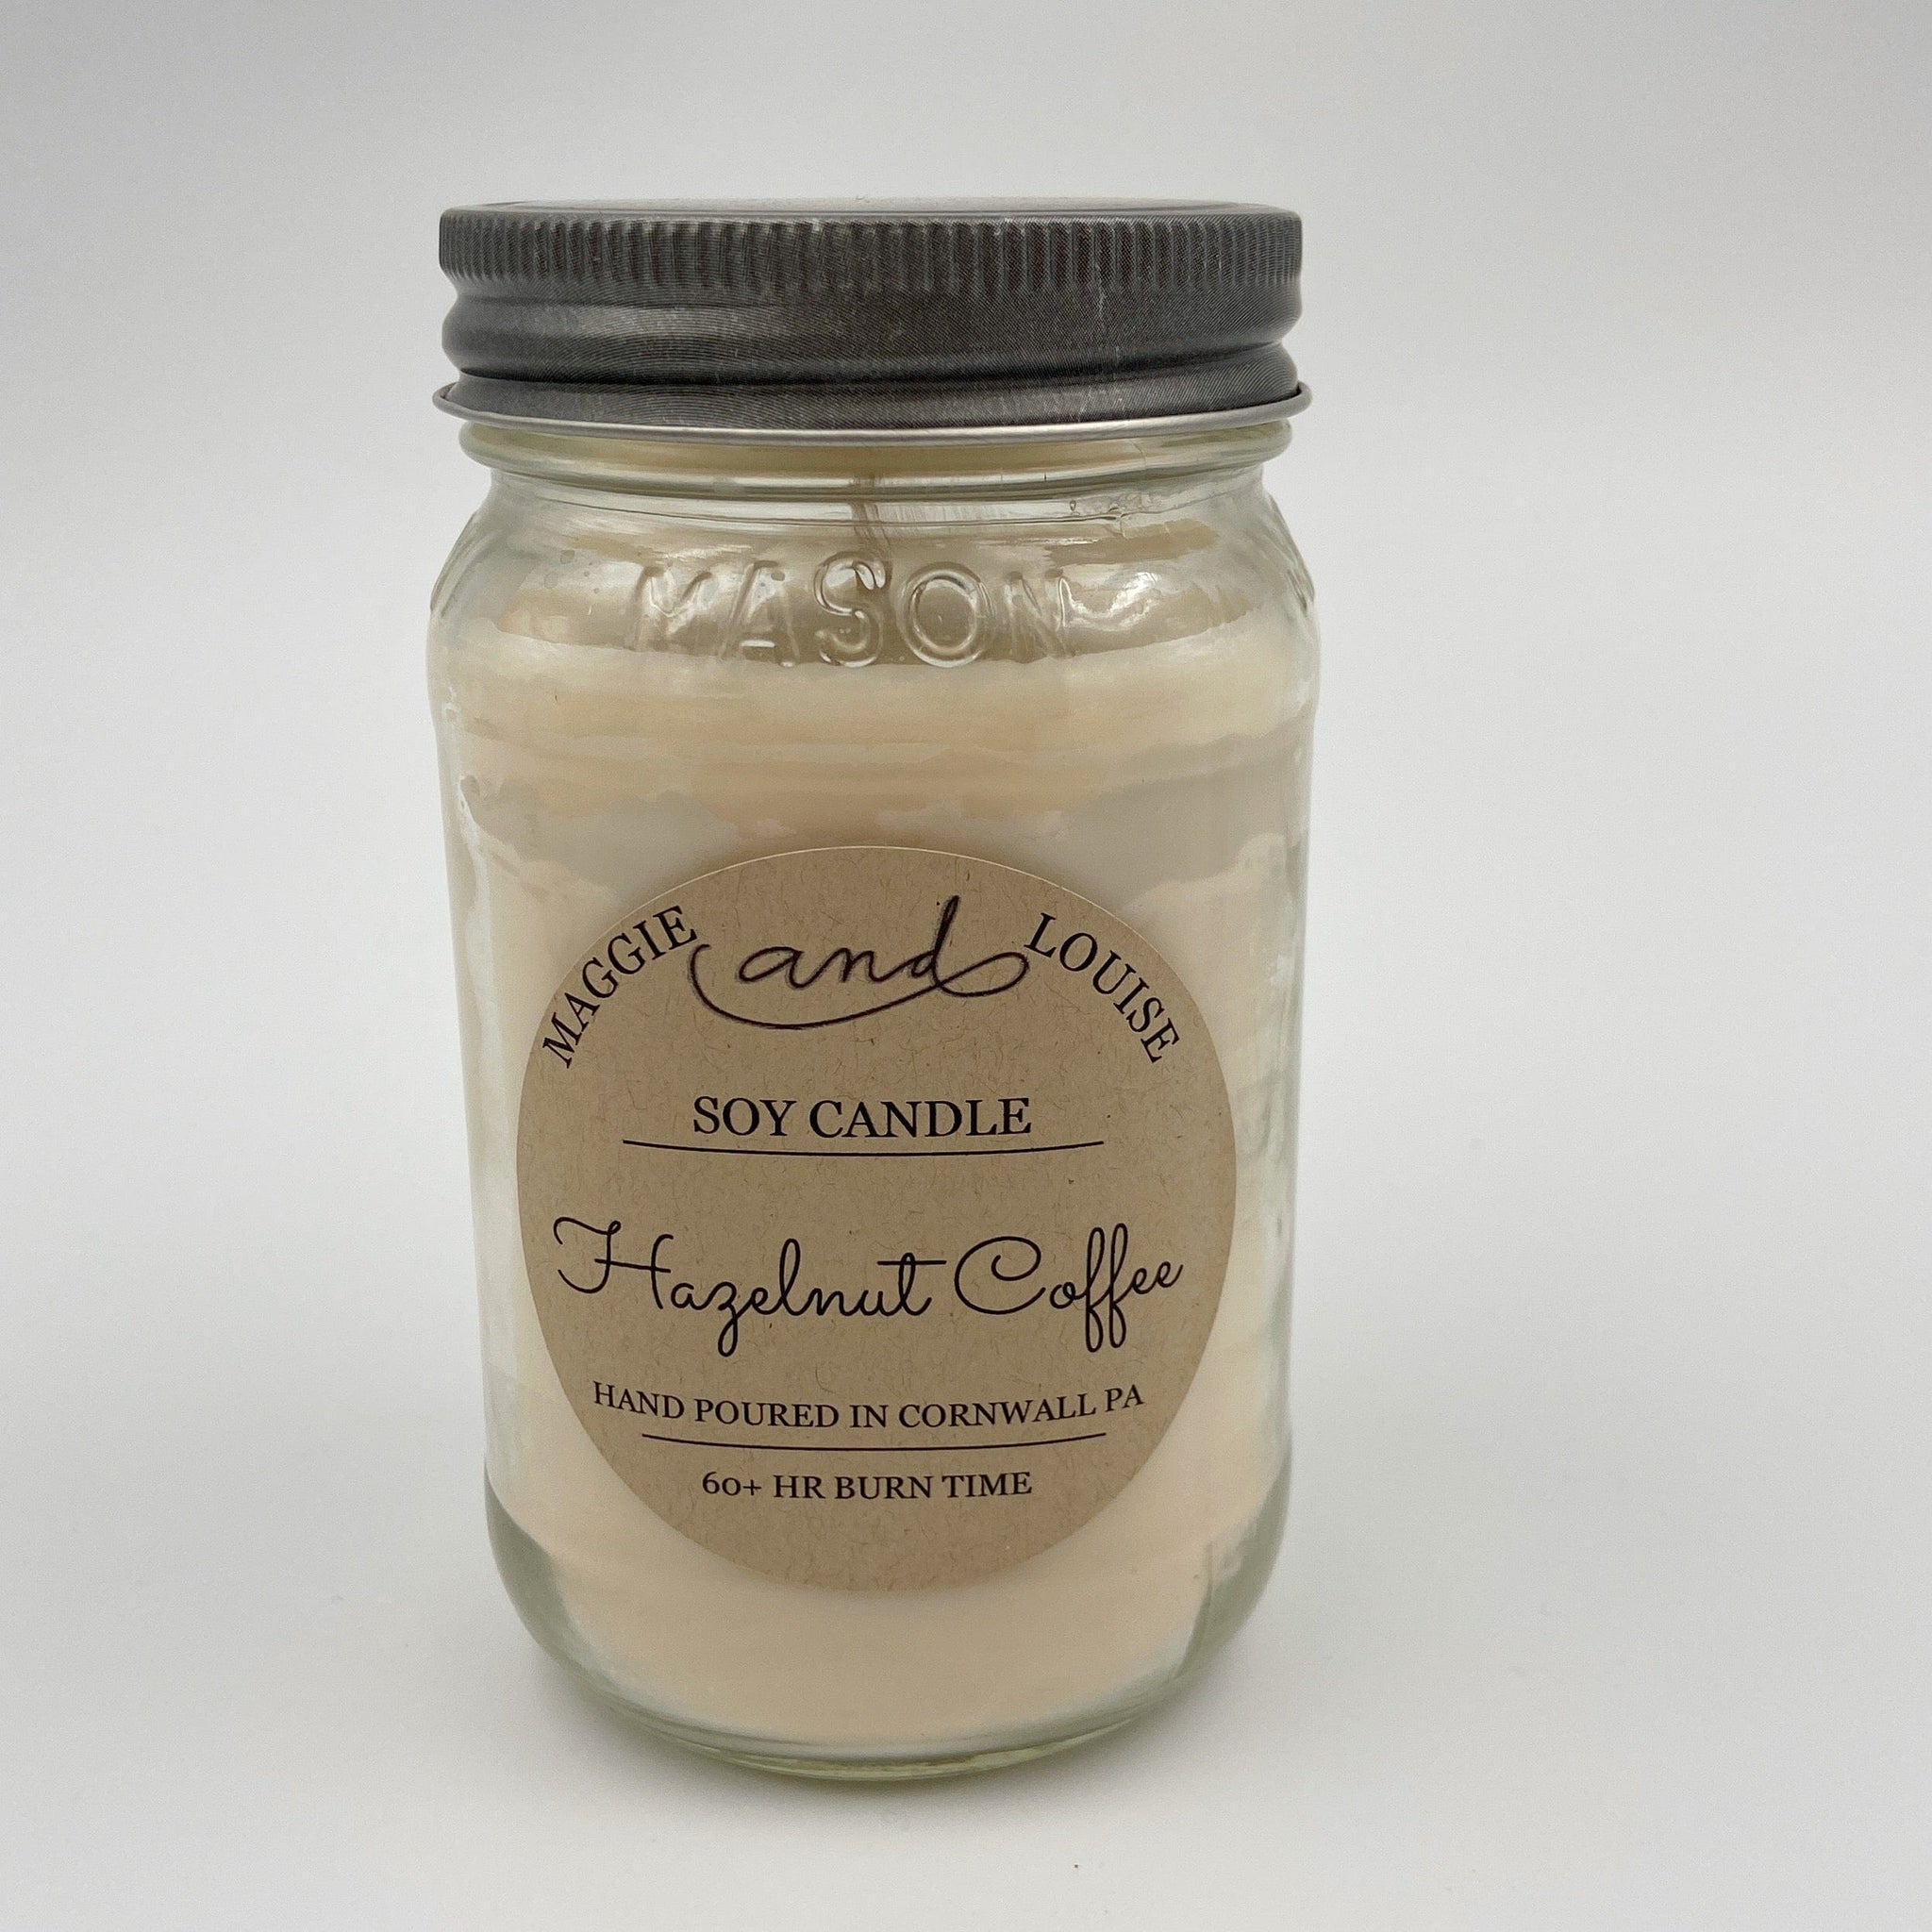 Hazelnut Coffee Soy Candle by Maggie and Louise - Five and Divine